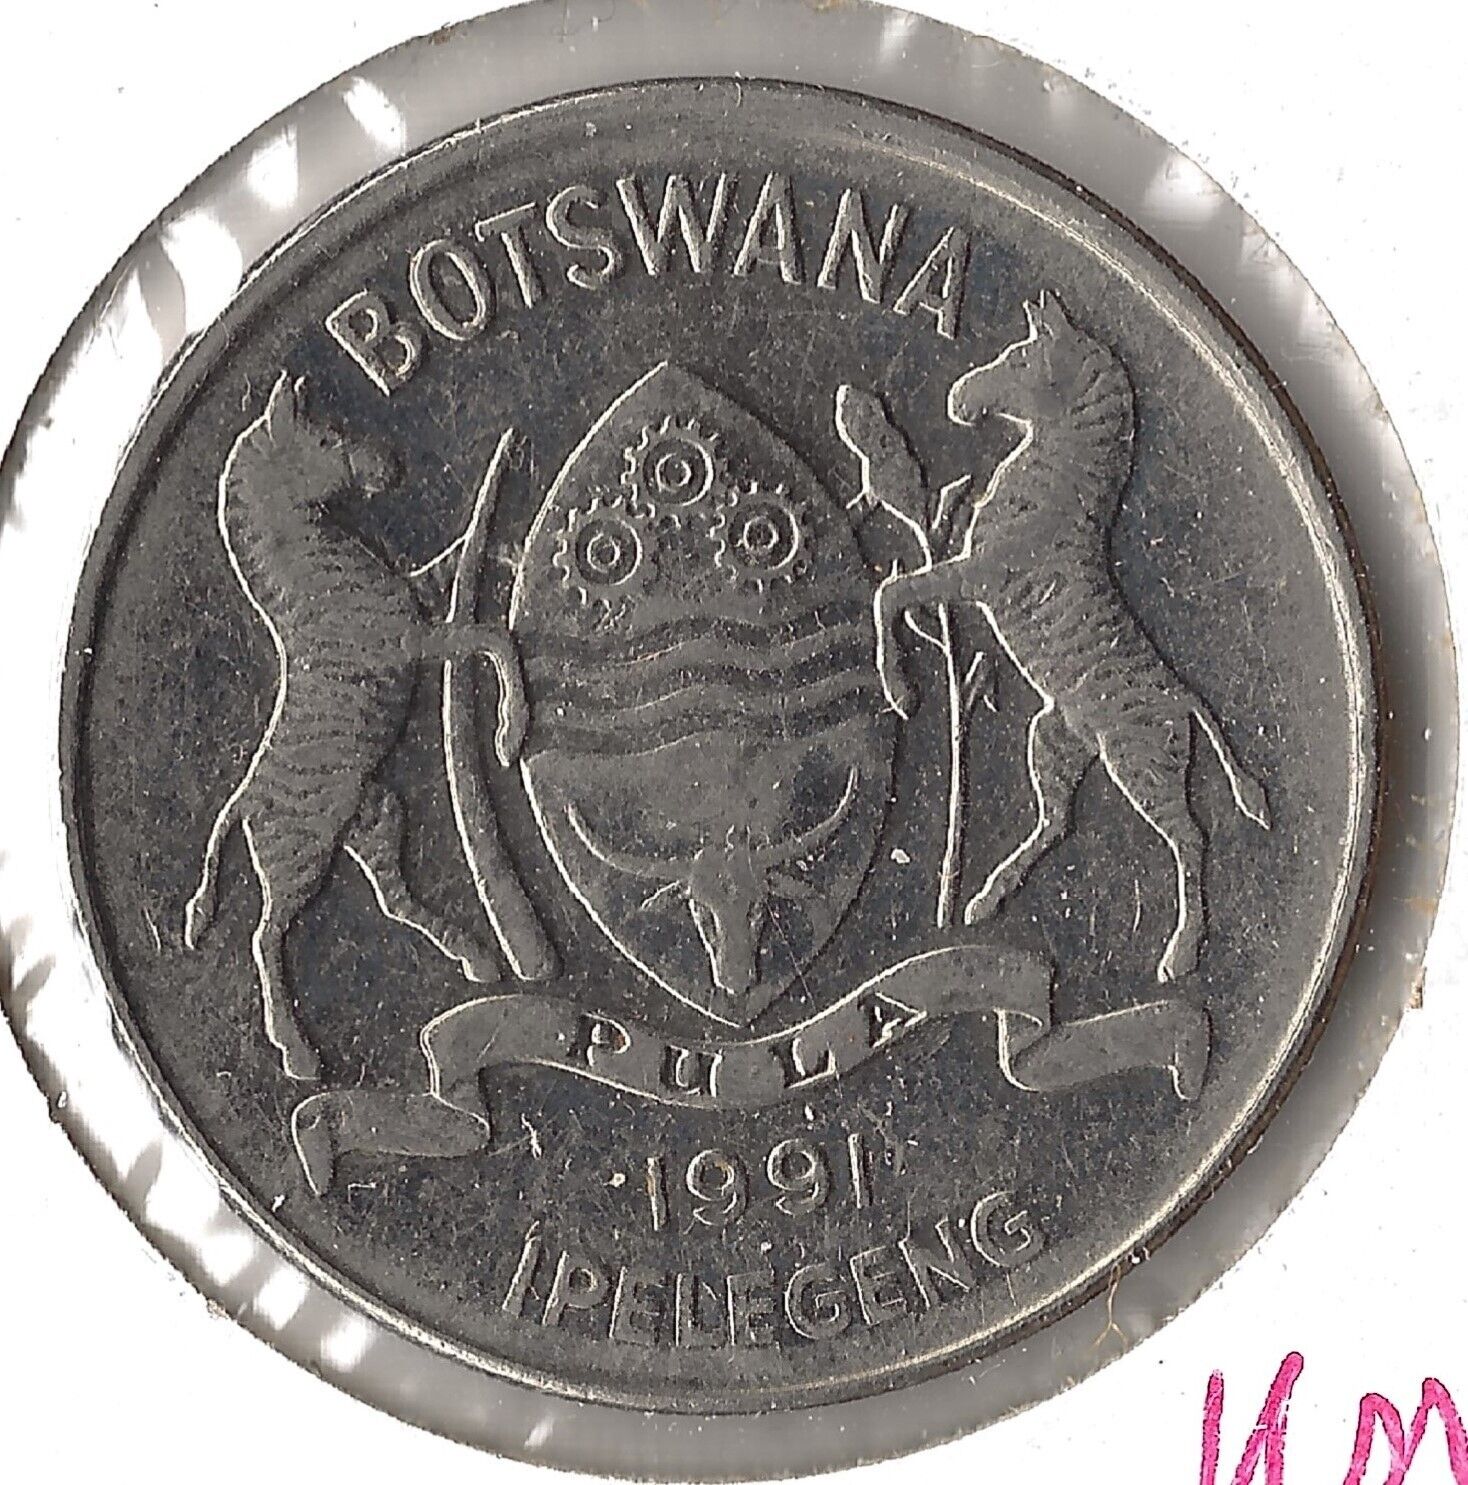 Coin Botswana 50 Thebe 1991 Km7a, Combined Shipping